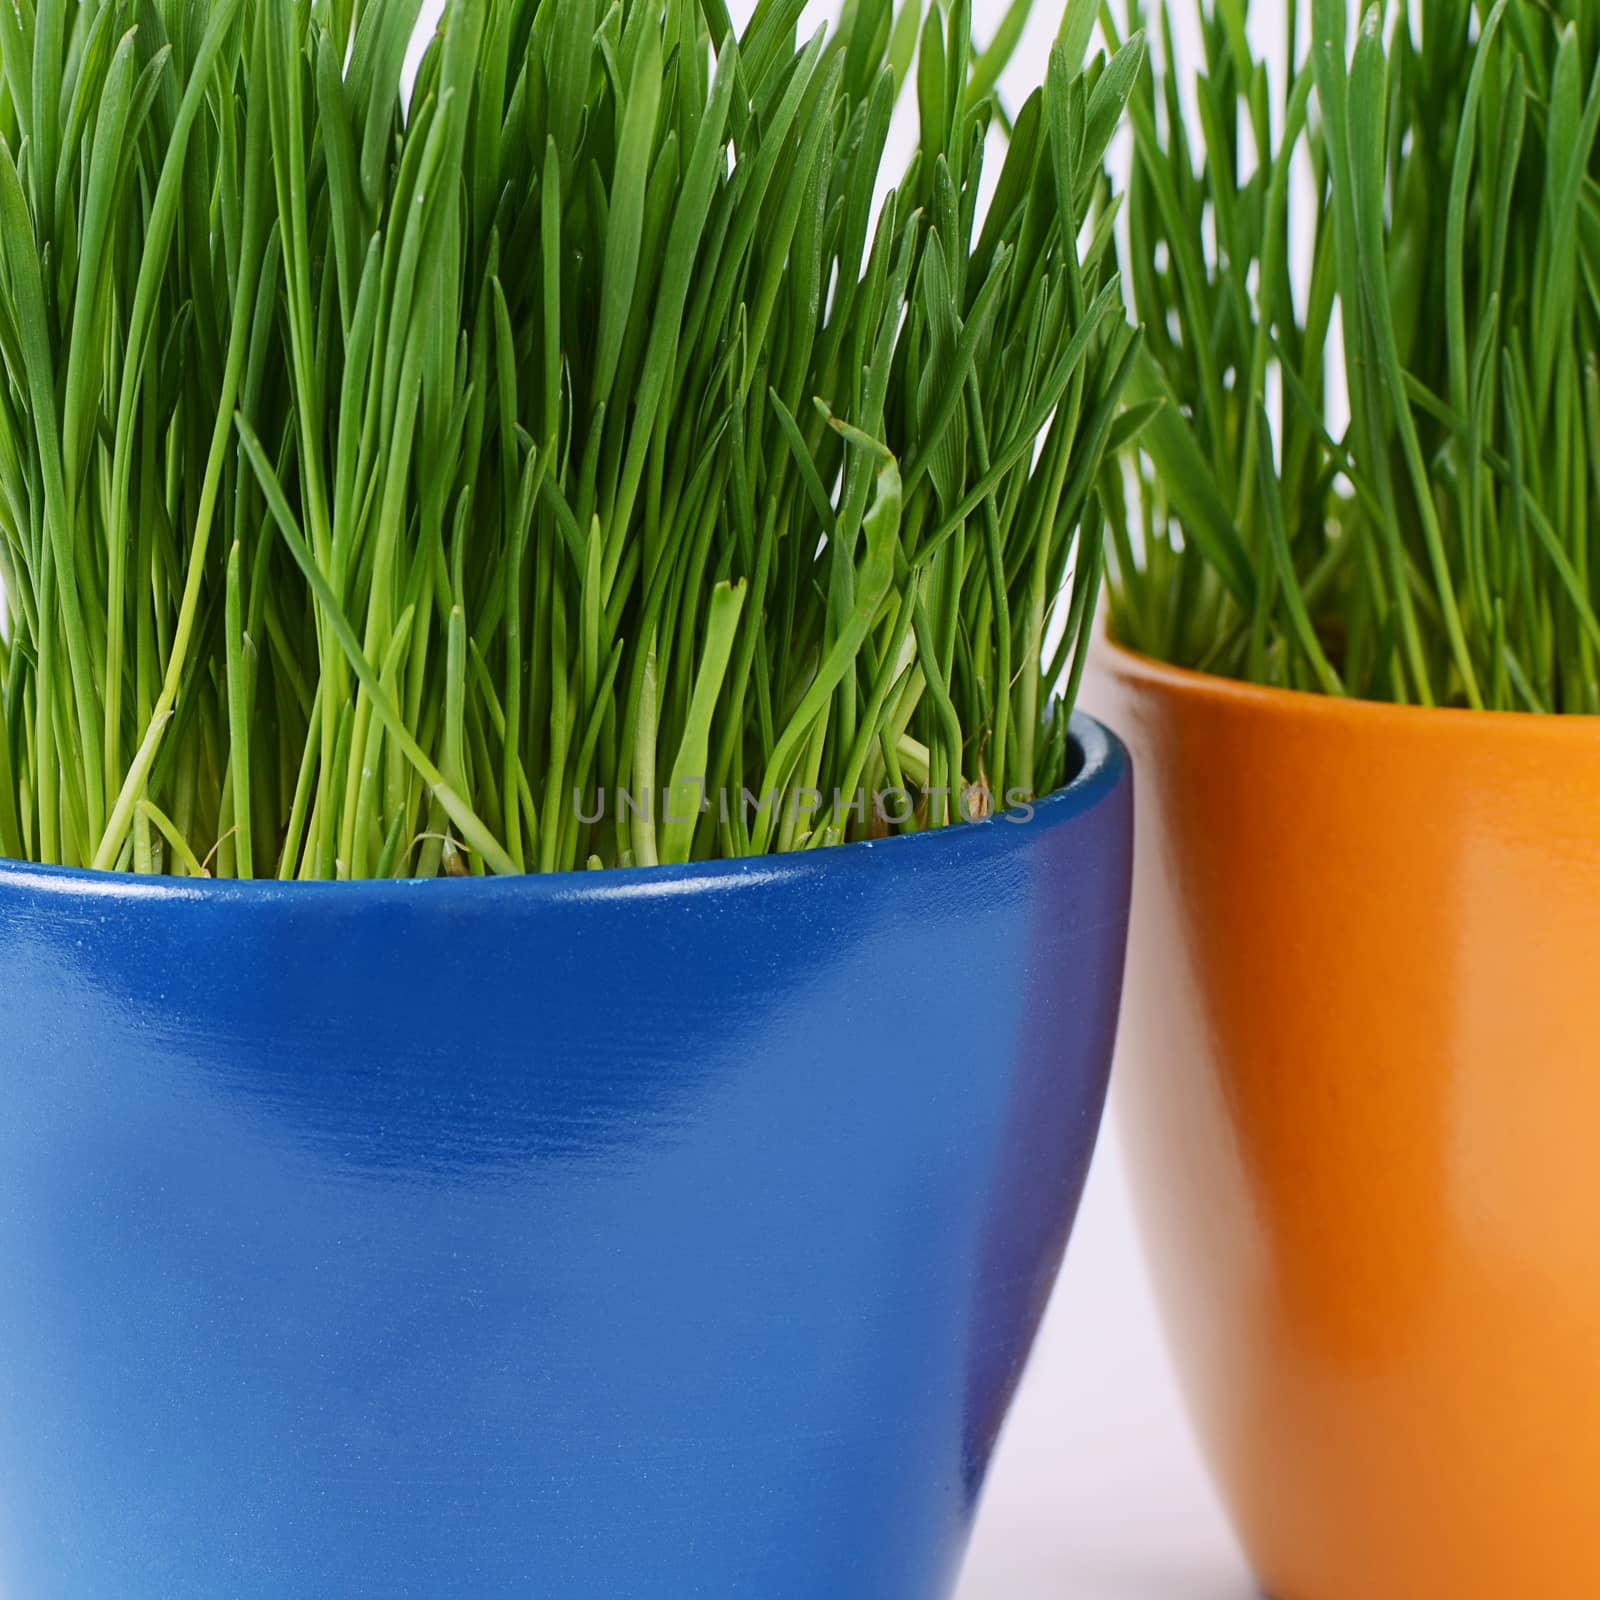 Green grass in pot as a background